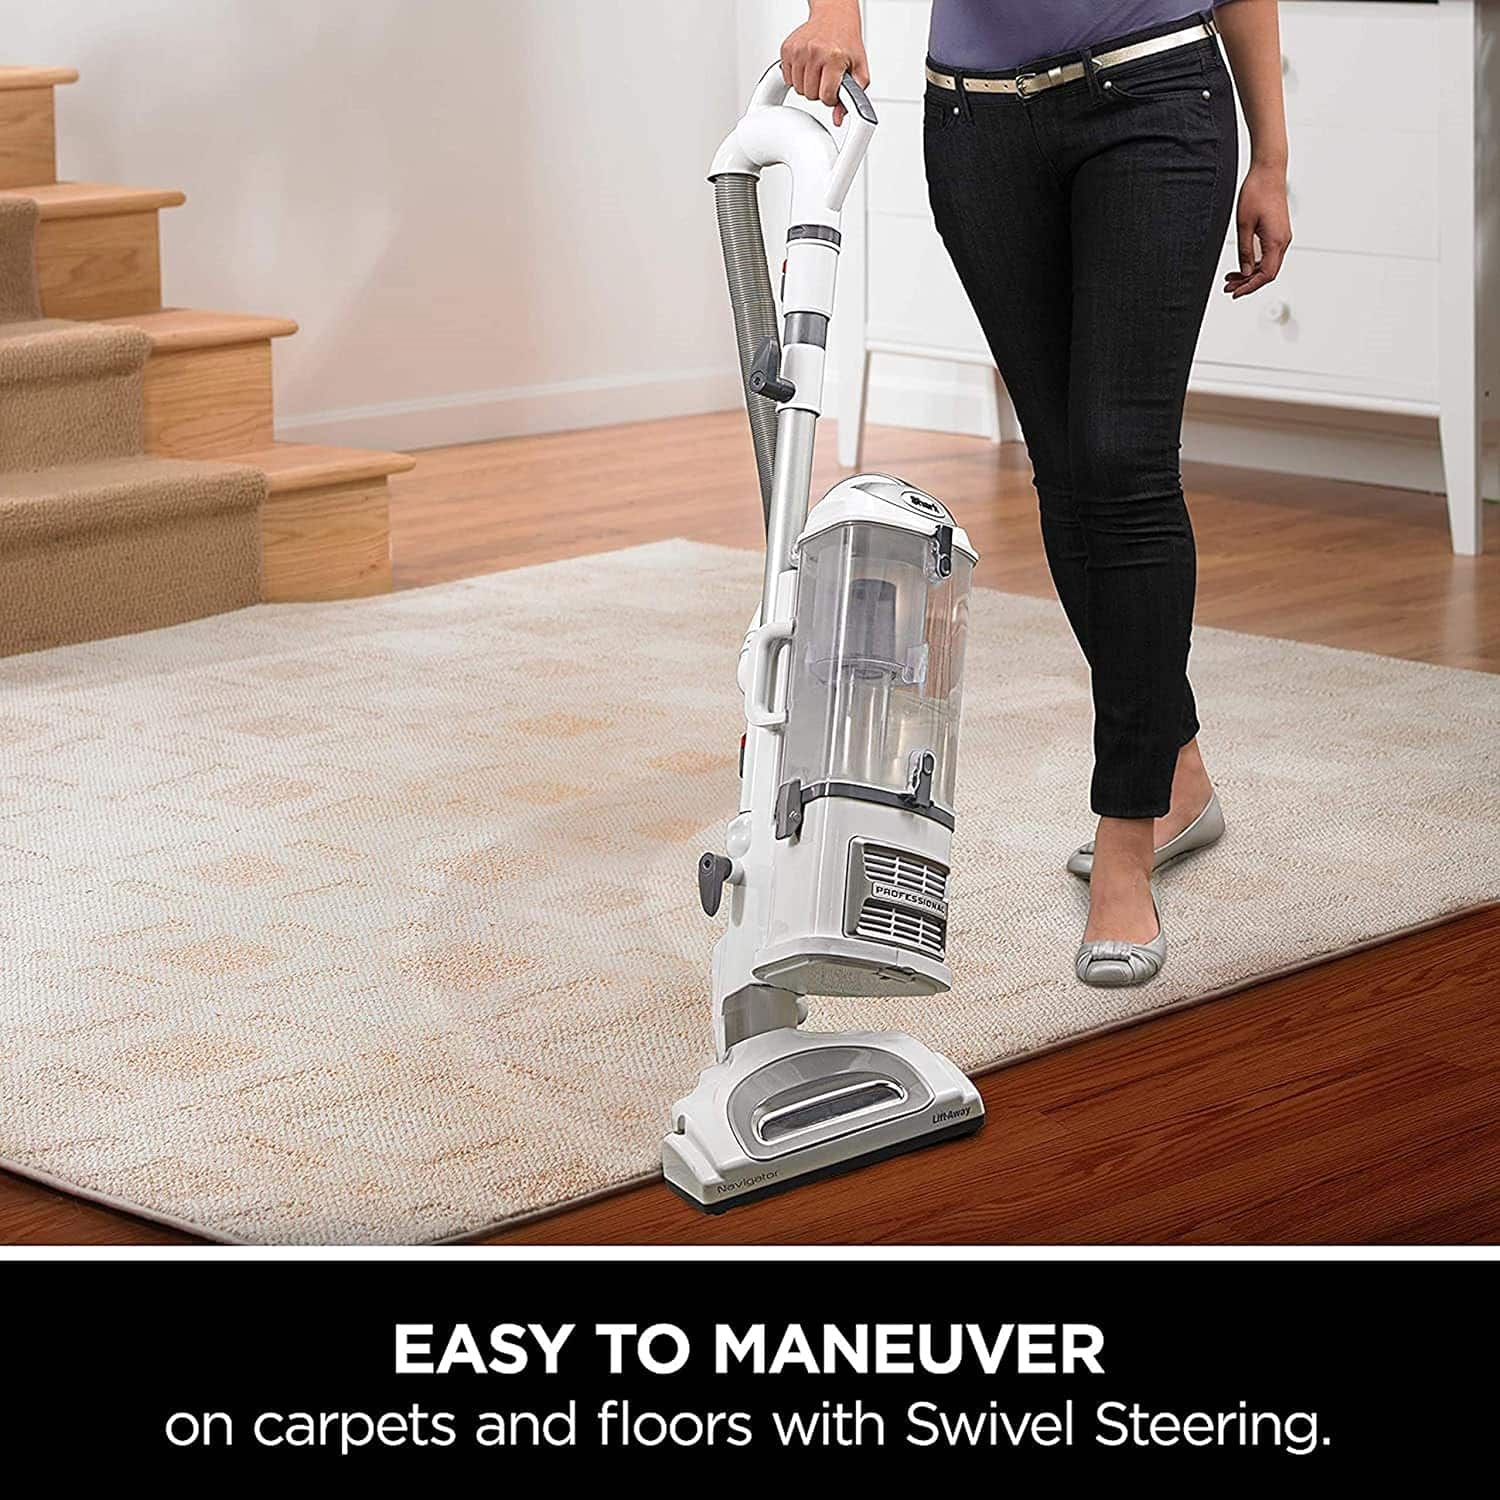 powerful and modern vacuum cleaners for cleaning - best residential vacuum cleaners